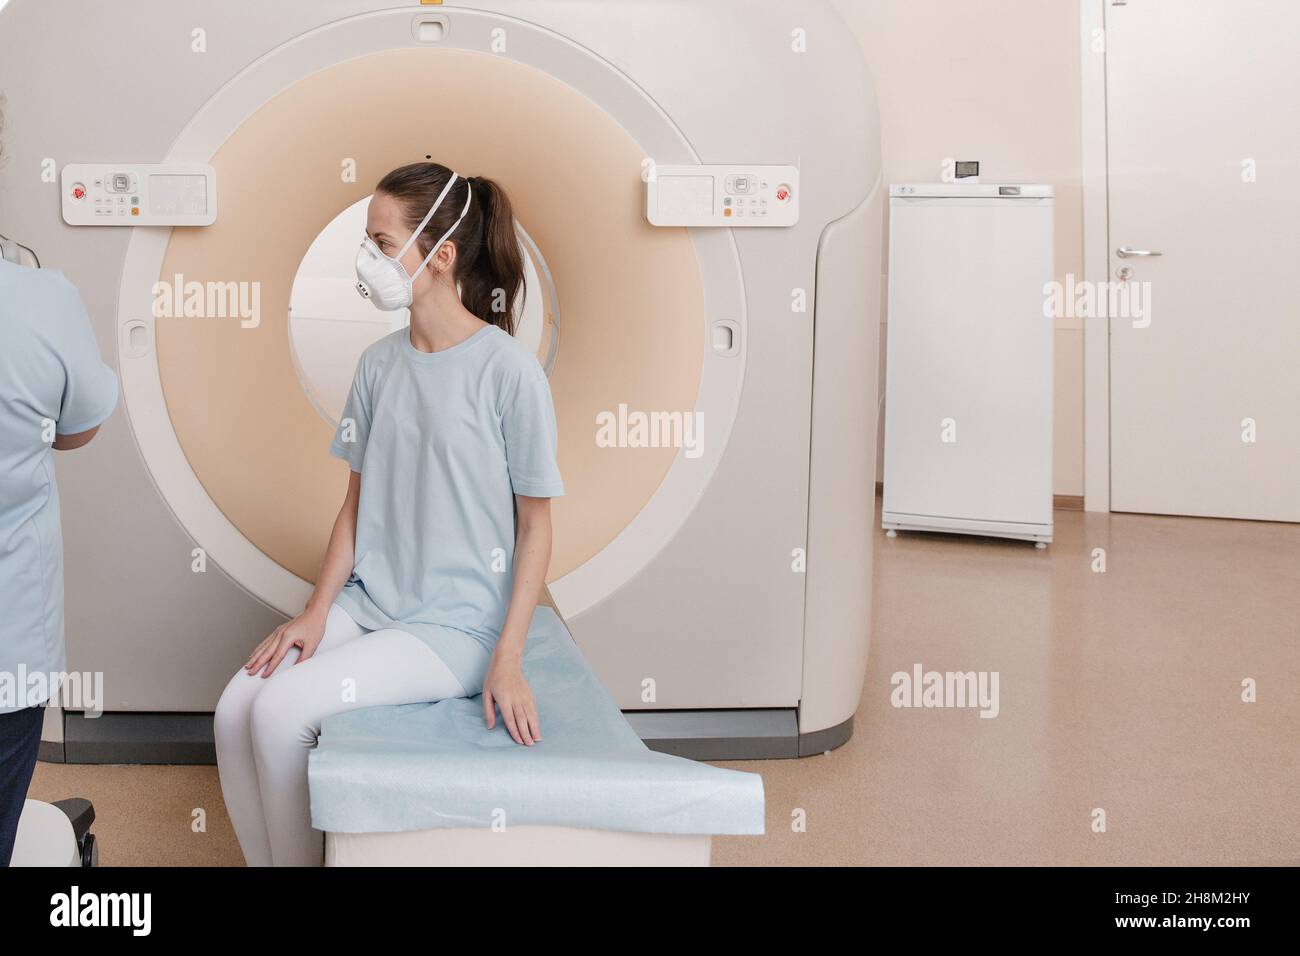 Medical CT or MRI Scan with a patient in the modern hospital laboratory. Interior of radiography department. Technologically advanced equipment in Stock Photo